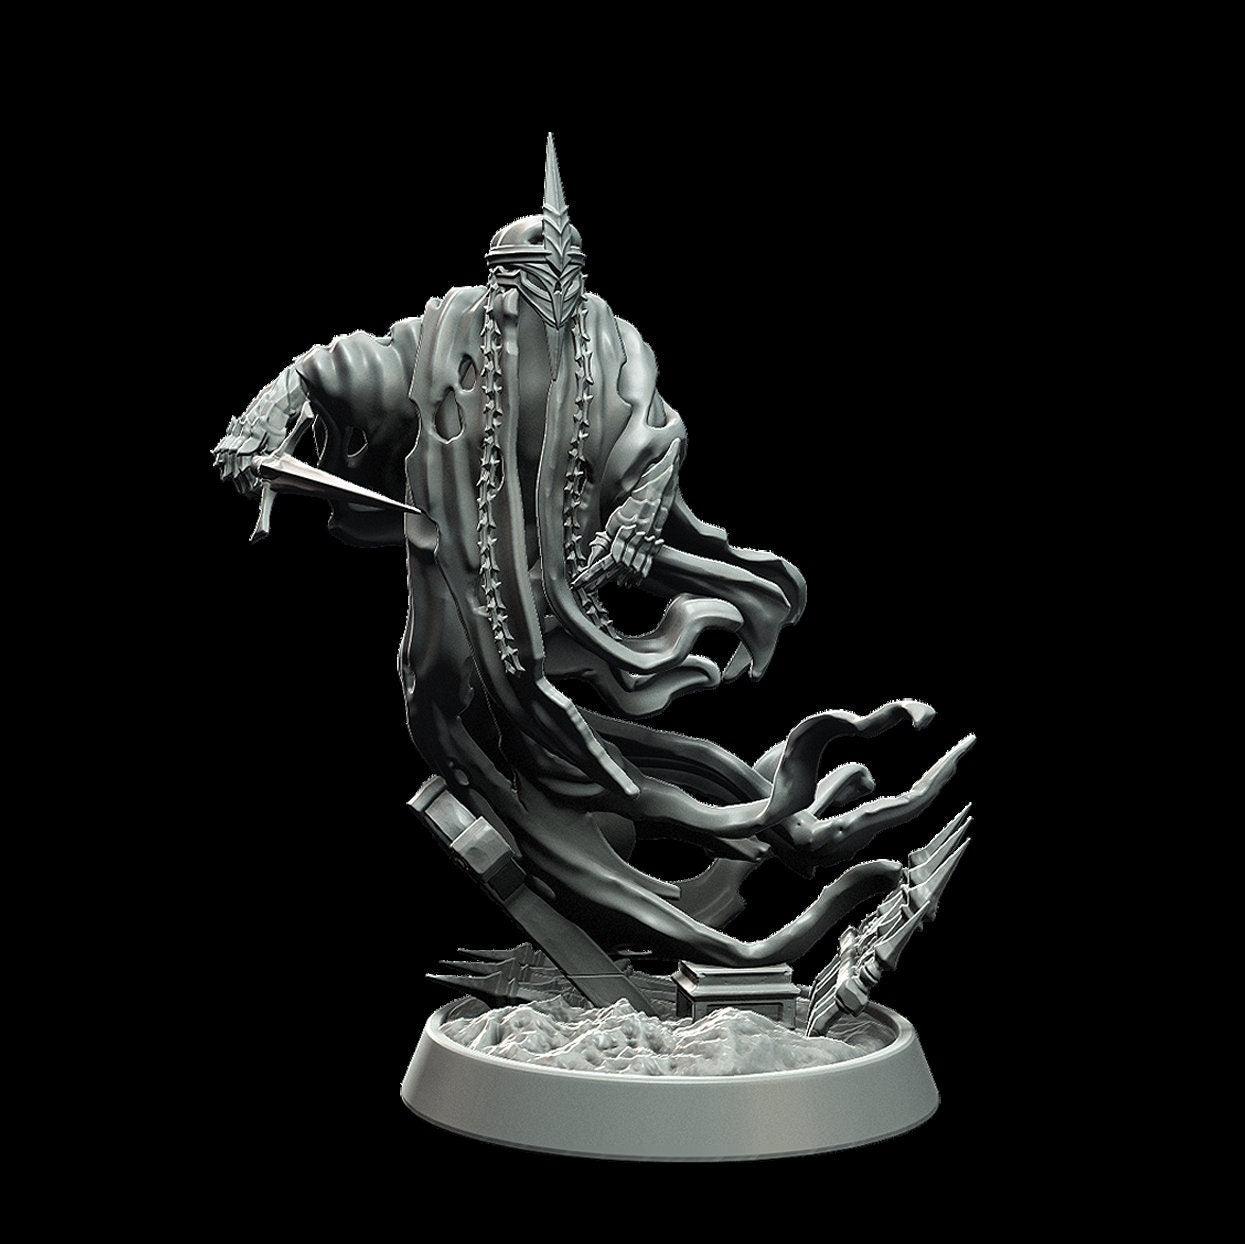 Damned Spirit Miniature - 3 Poses - 28mm scale Tabletop gaming DnD Miniature Dungeons and Dragons,dnd 5e - Plague Miniatures shop for DnD Miniatures